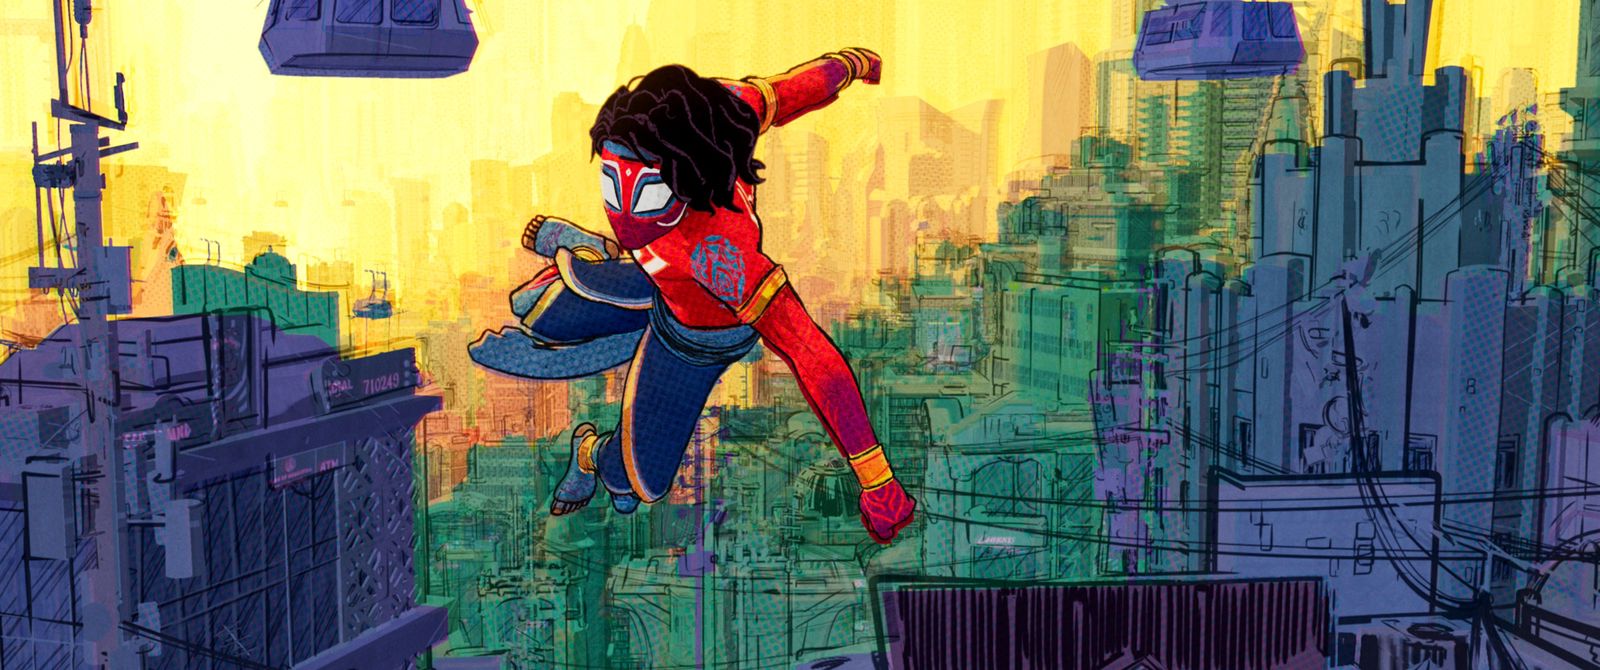 Spider-Man: Across the Spiderverse Director Kemp Powers talks about what makes Indian Spider-Man, Pavitr Prabhakar different from other Spider-People!